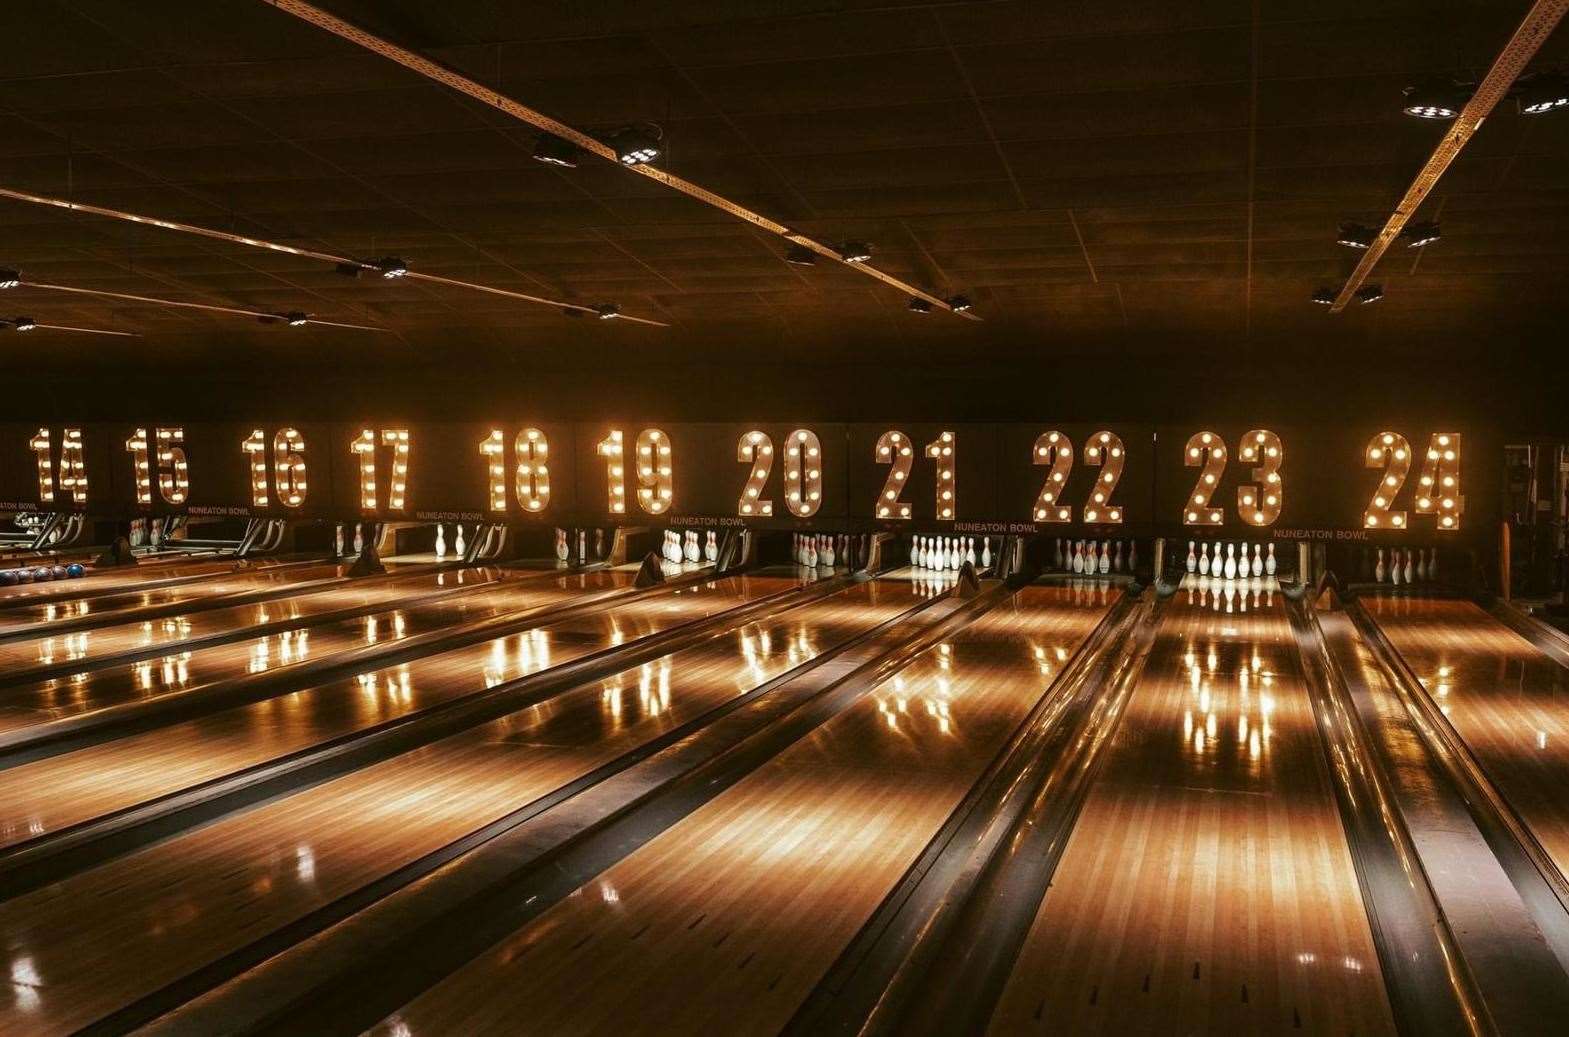 Disco-style bowling is now in Chatham